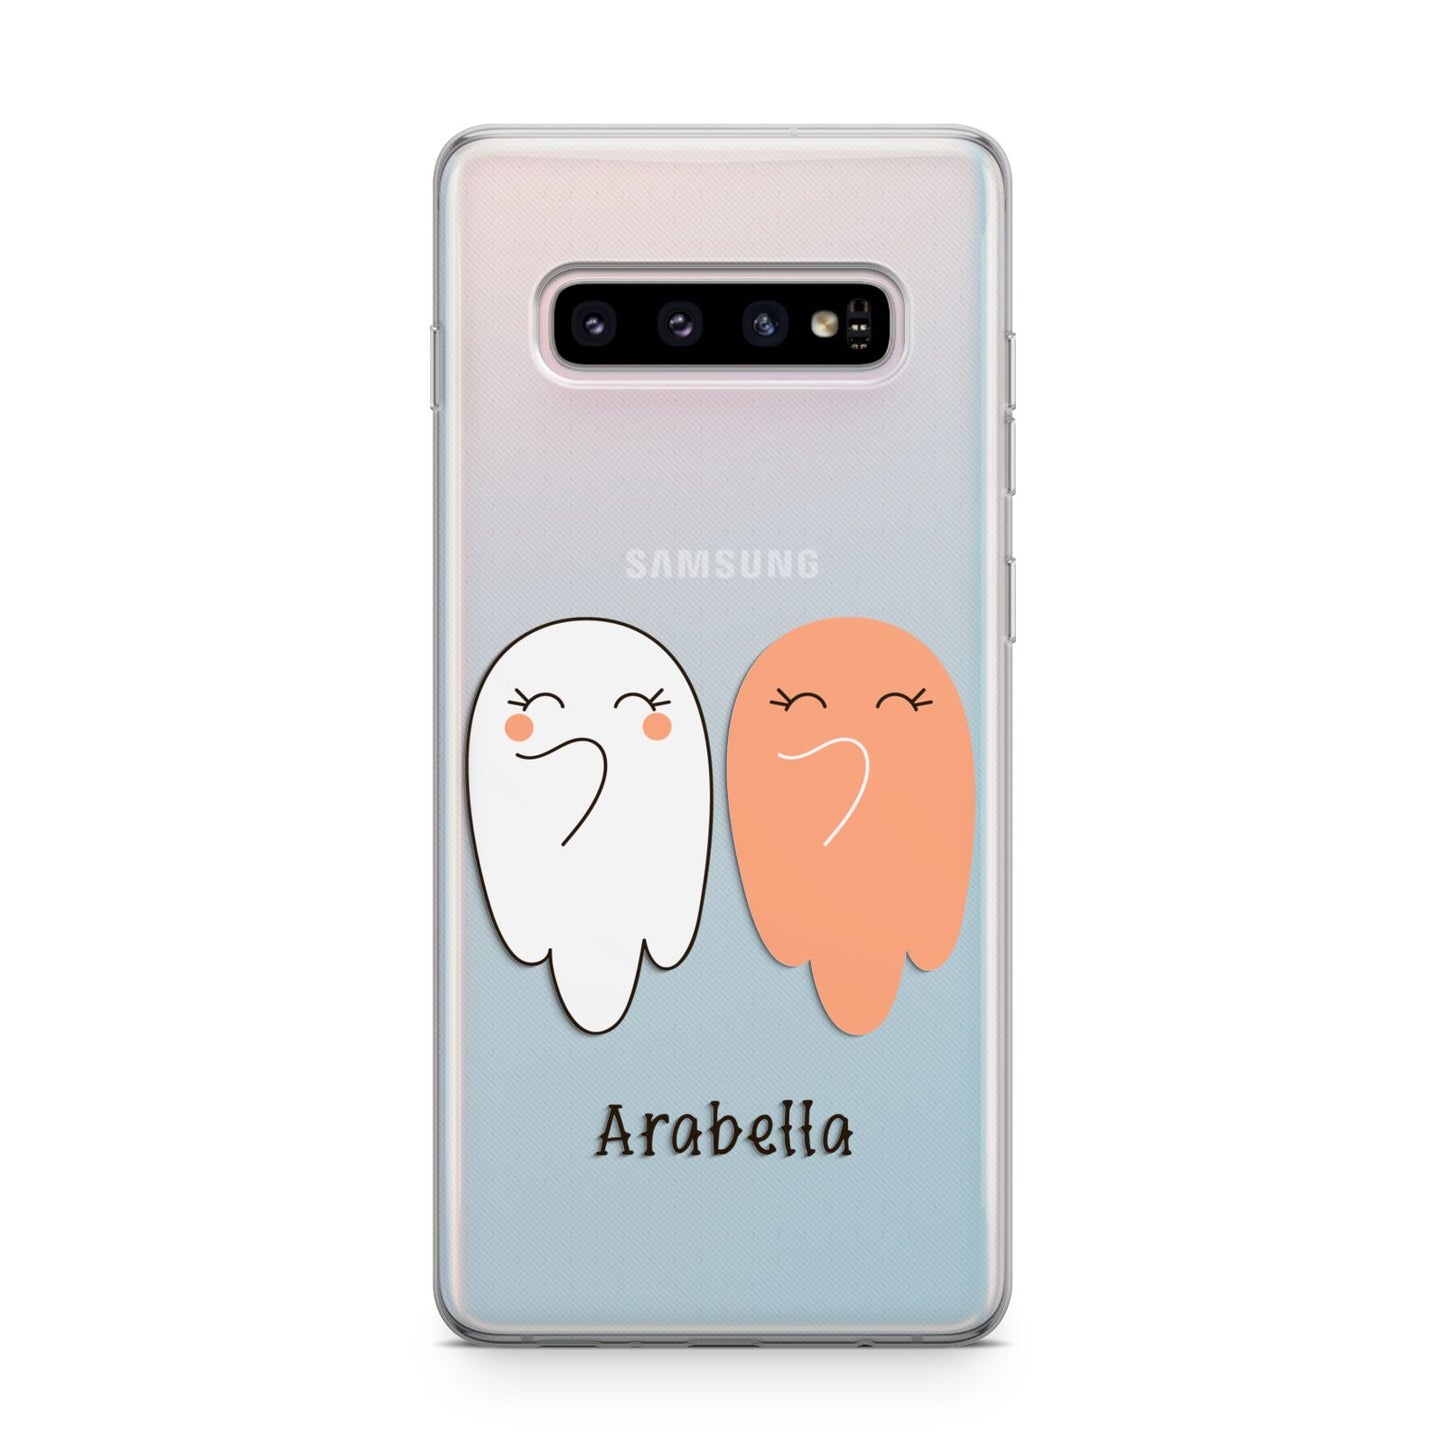 Two Ghosts Samsung Galaxy S10 Plus Case